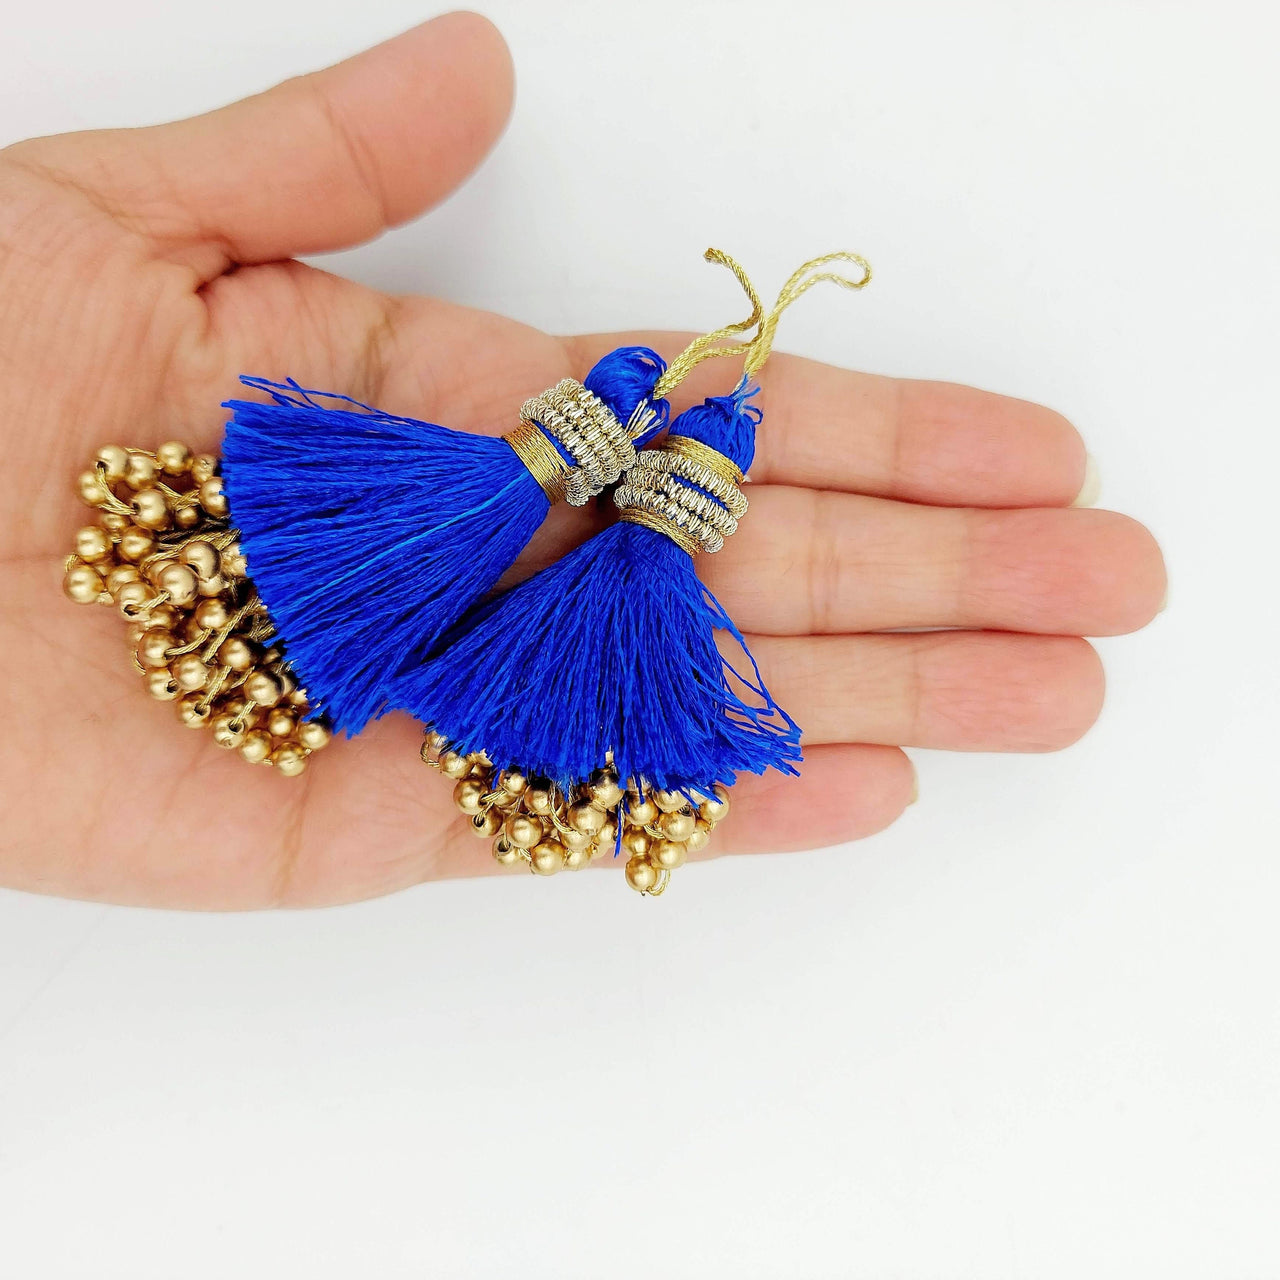 Royal Blue Tassels With Gold Beads, Beaded Thread Tassel Charms, Silky Tassels